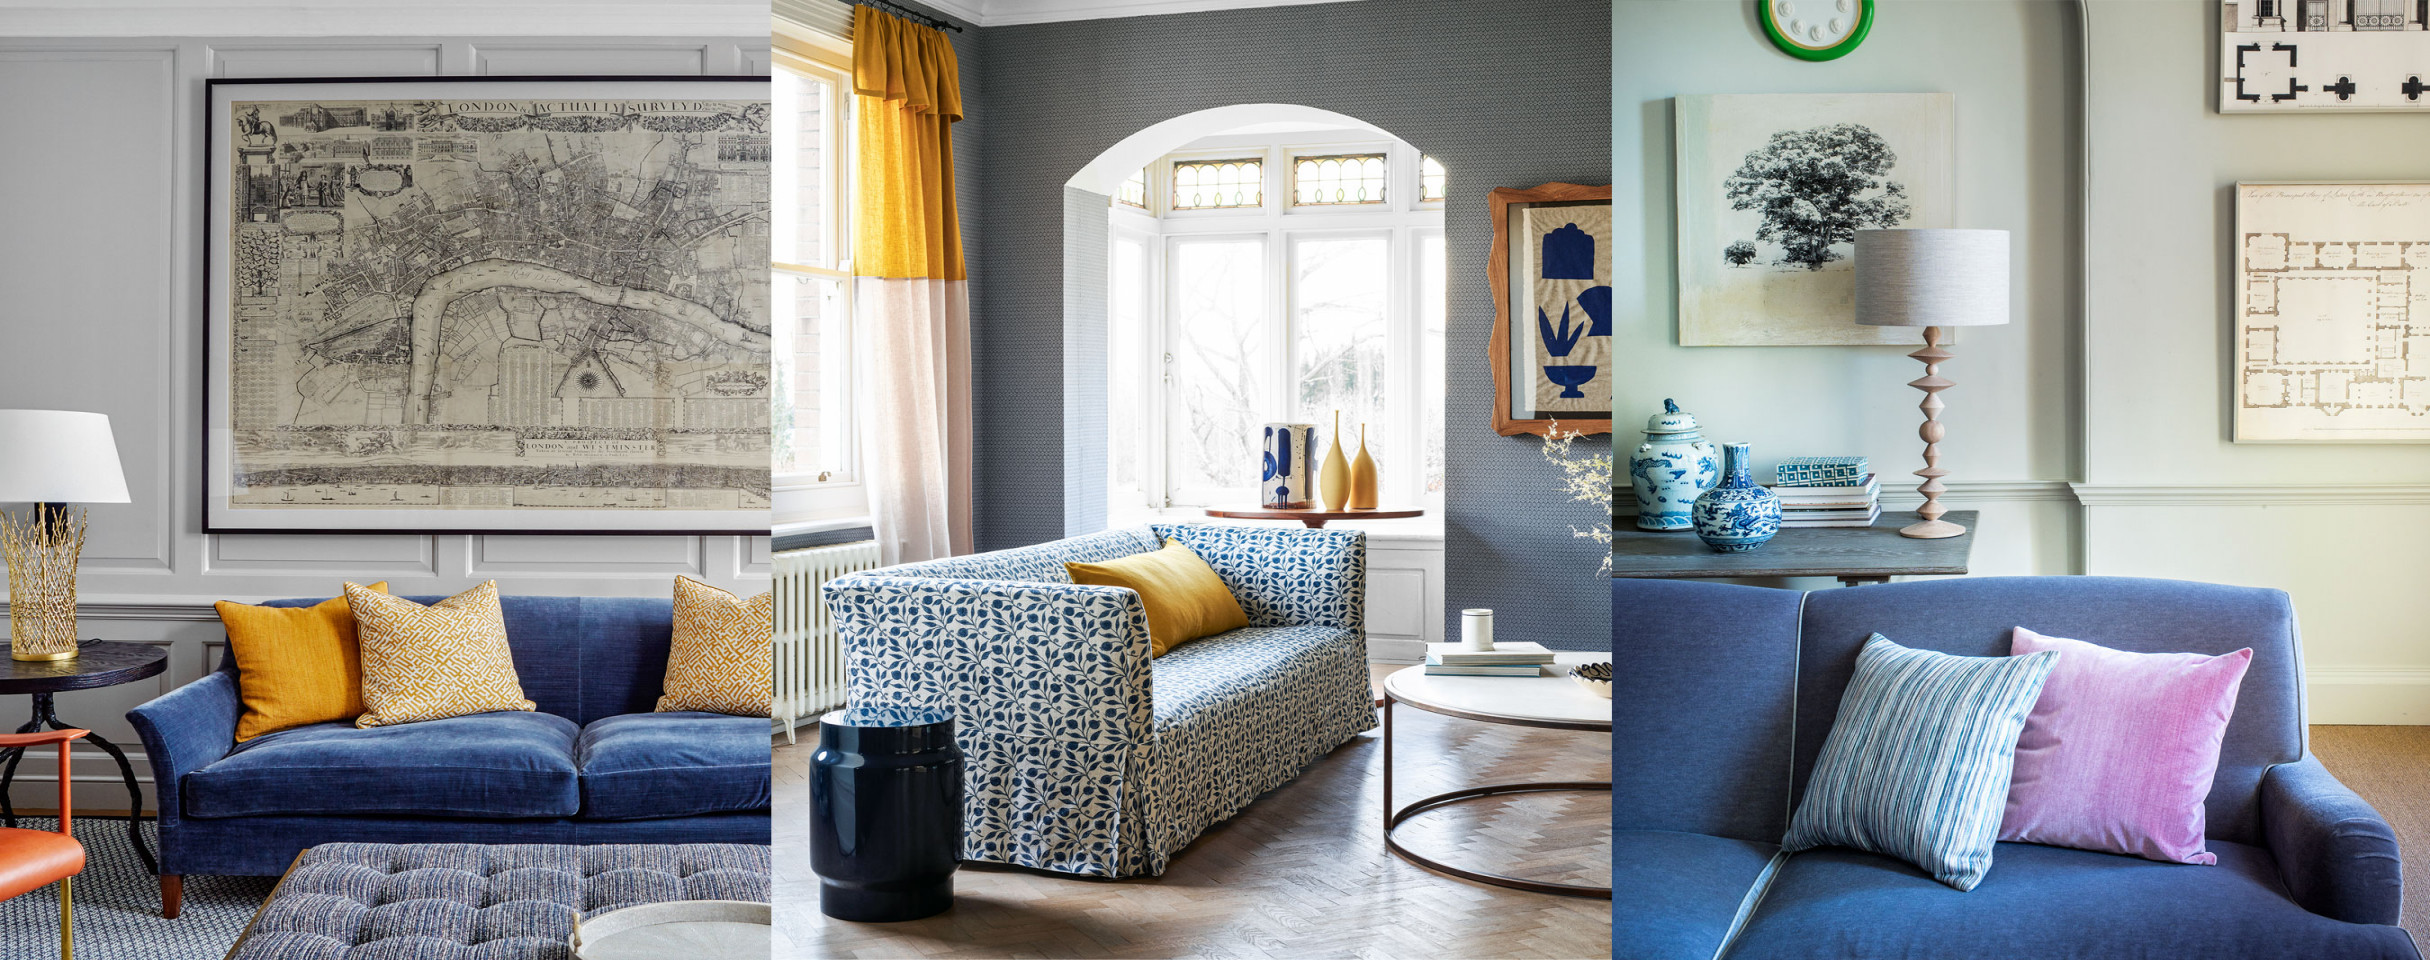 Blue couch living room ideas:  ways to complement this standout